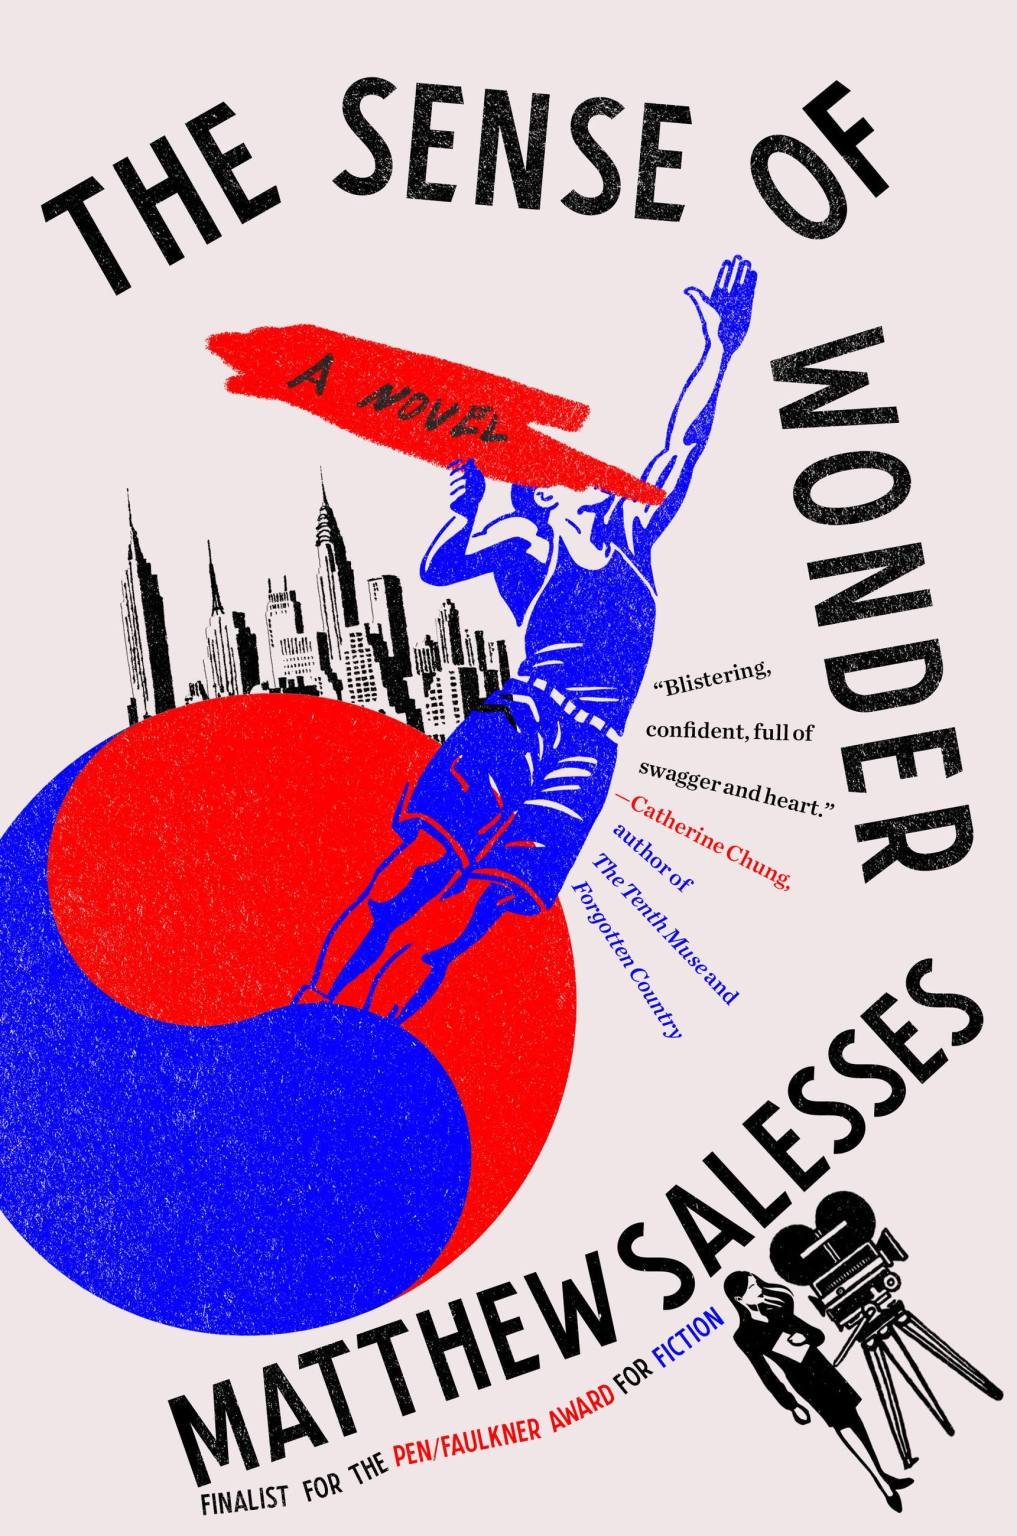 The Sense of Wonder: A Novel by Matthew Salesses book cover image